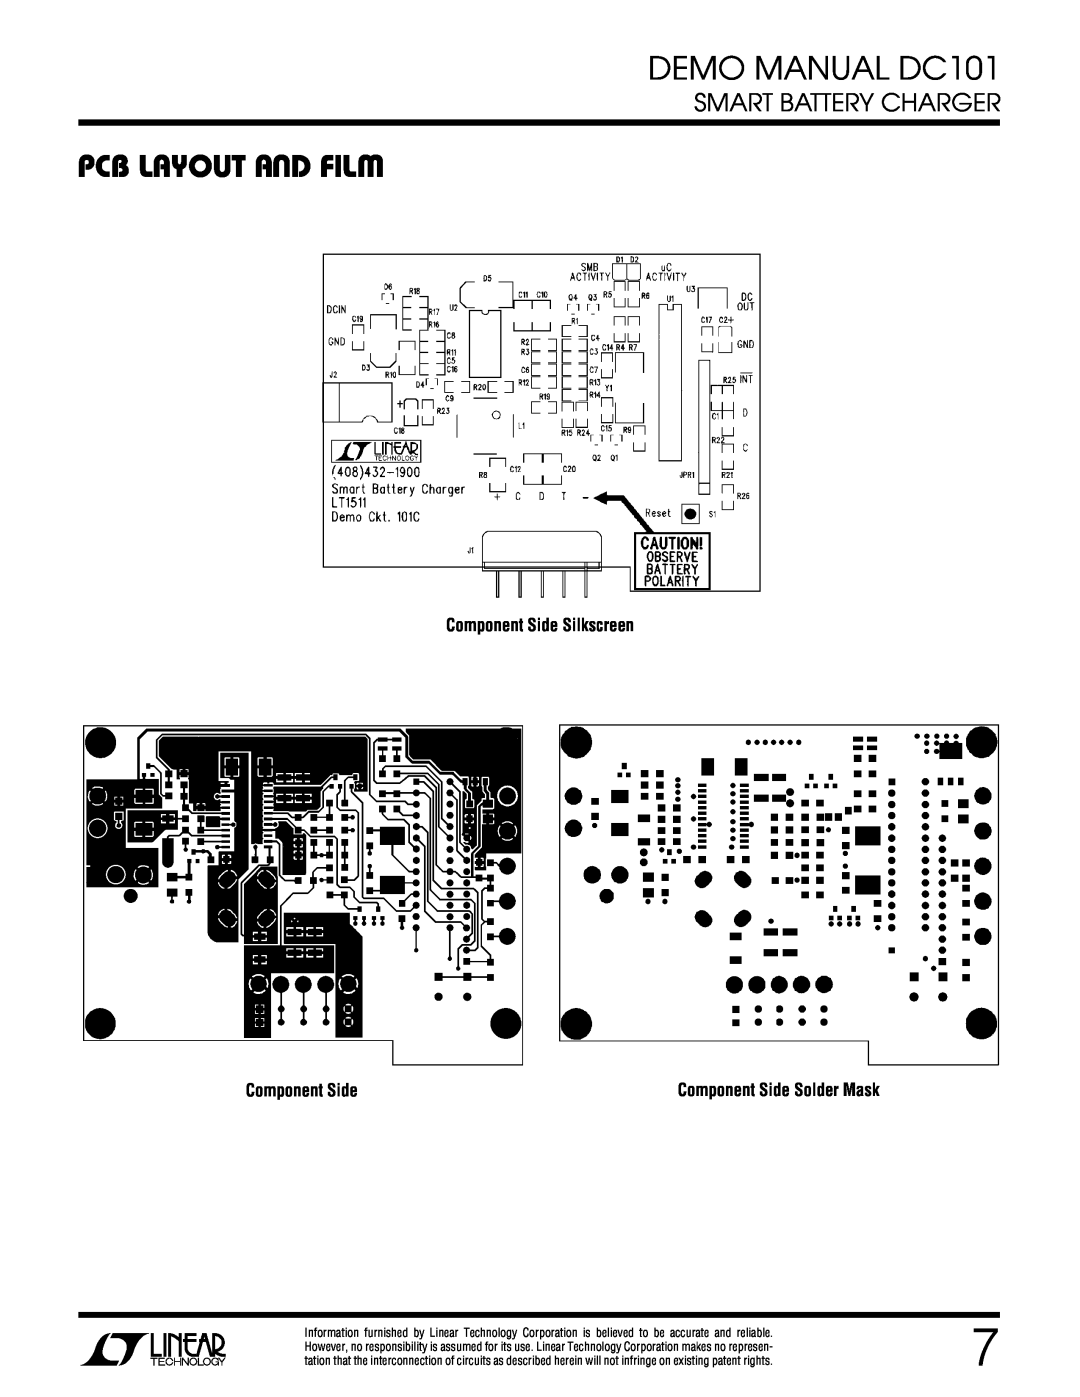 Linear manual Pcb Layout Aud Filw, DEMO MANUAL DC101, Smart Battery Charger, Component Side Silkscreen 